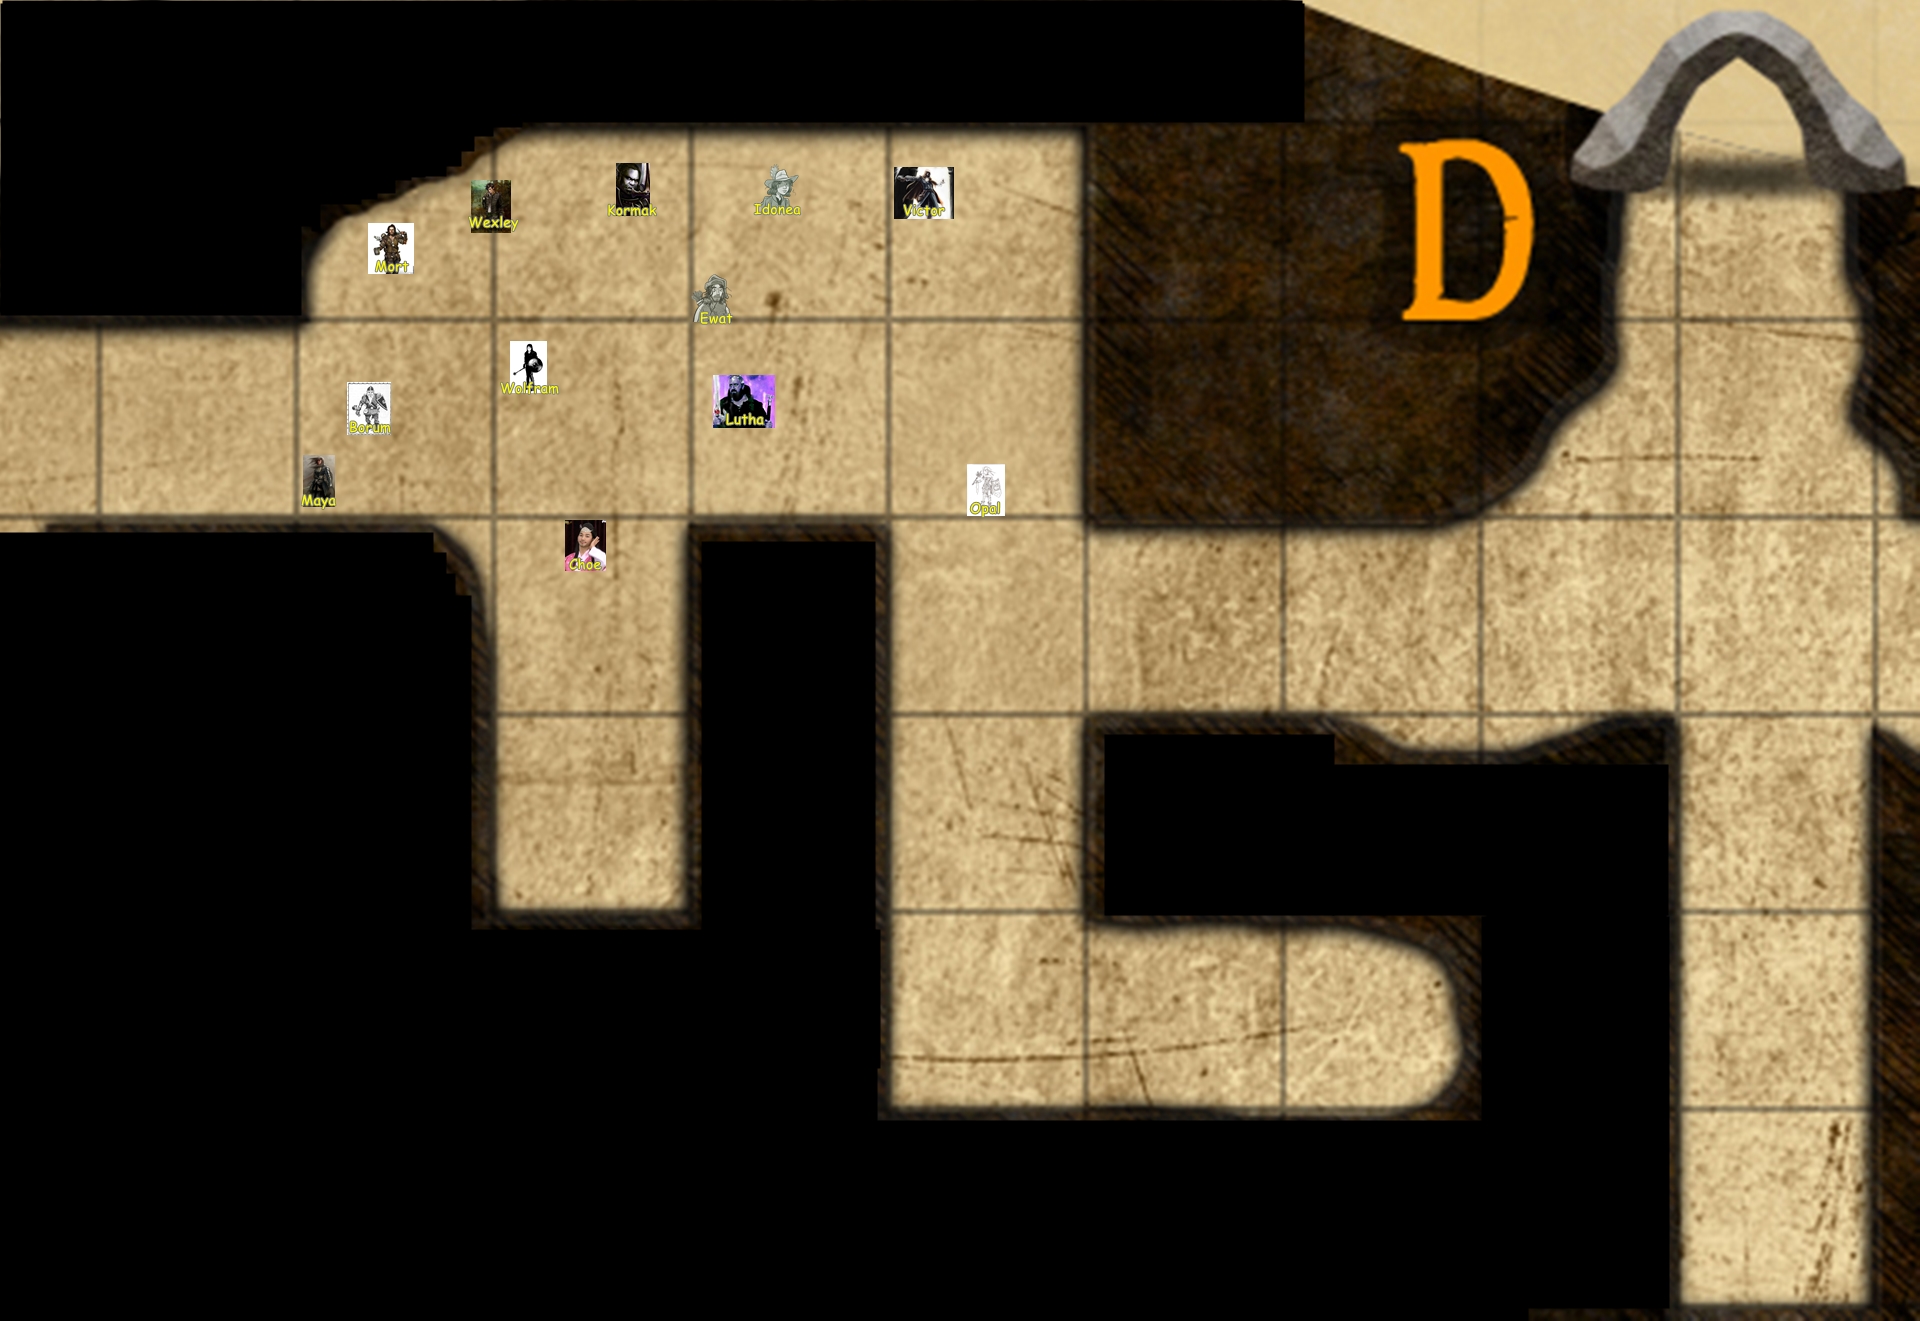 caves_of_chaos_Cave_D_Avatars_Guard_Room.jpg